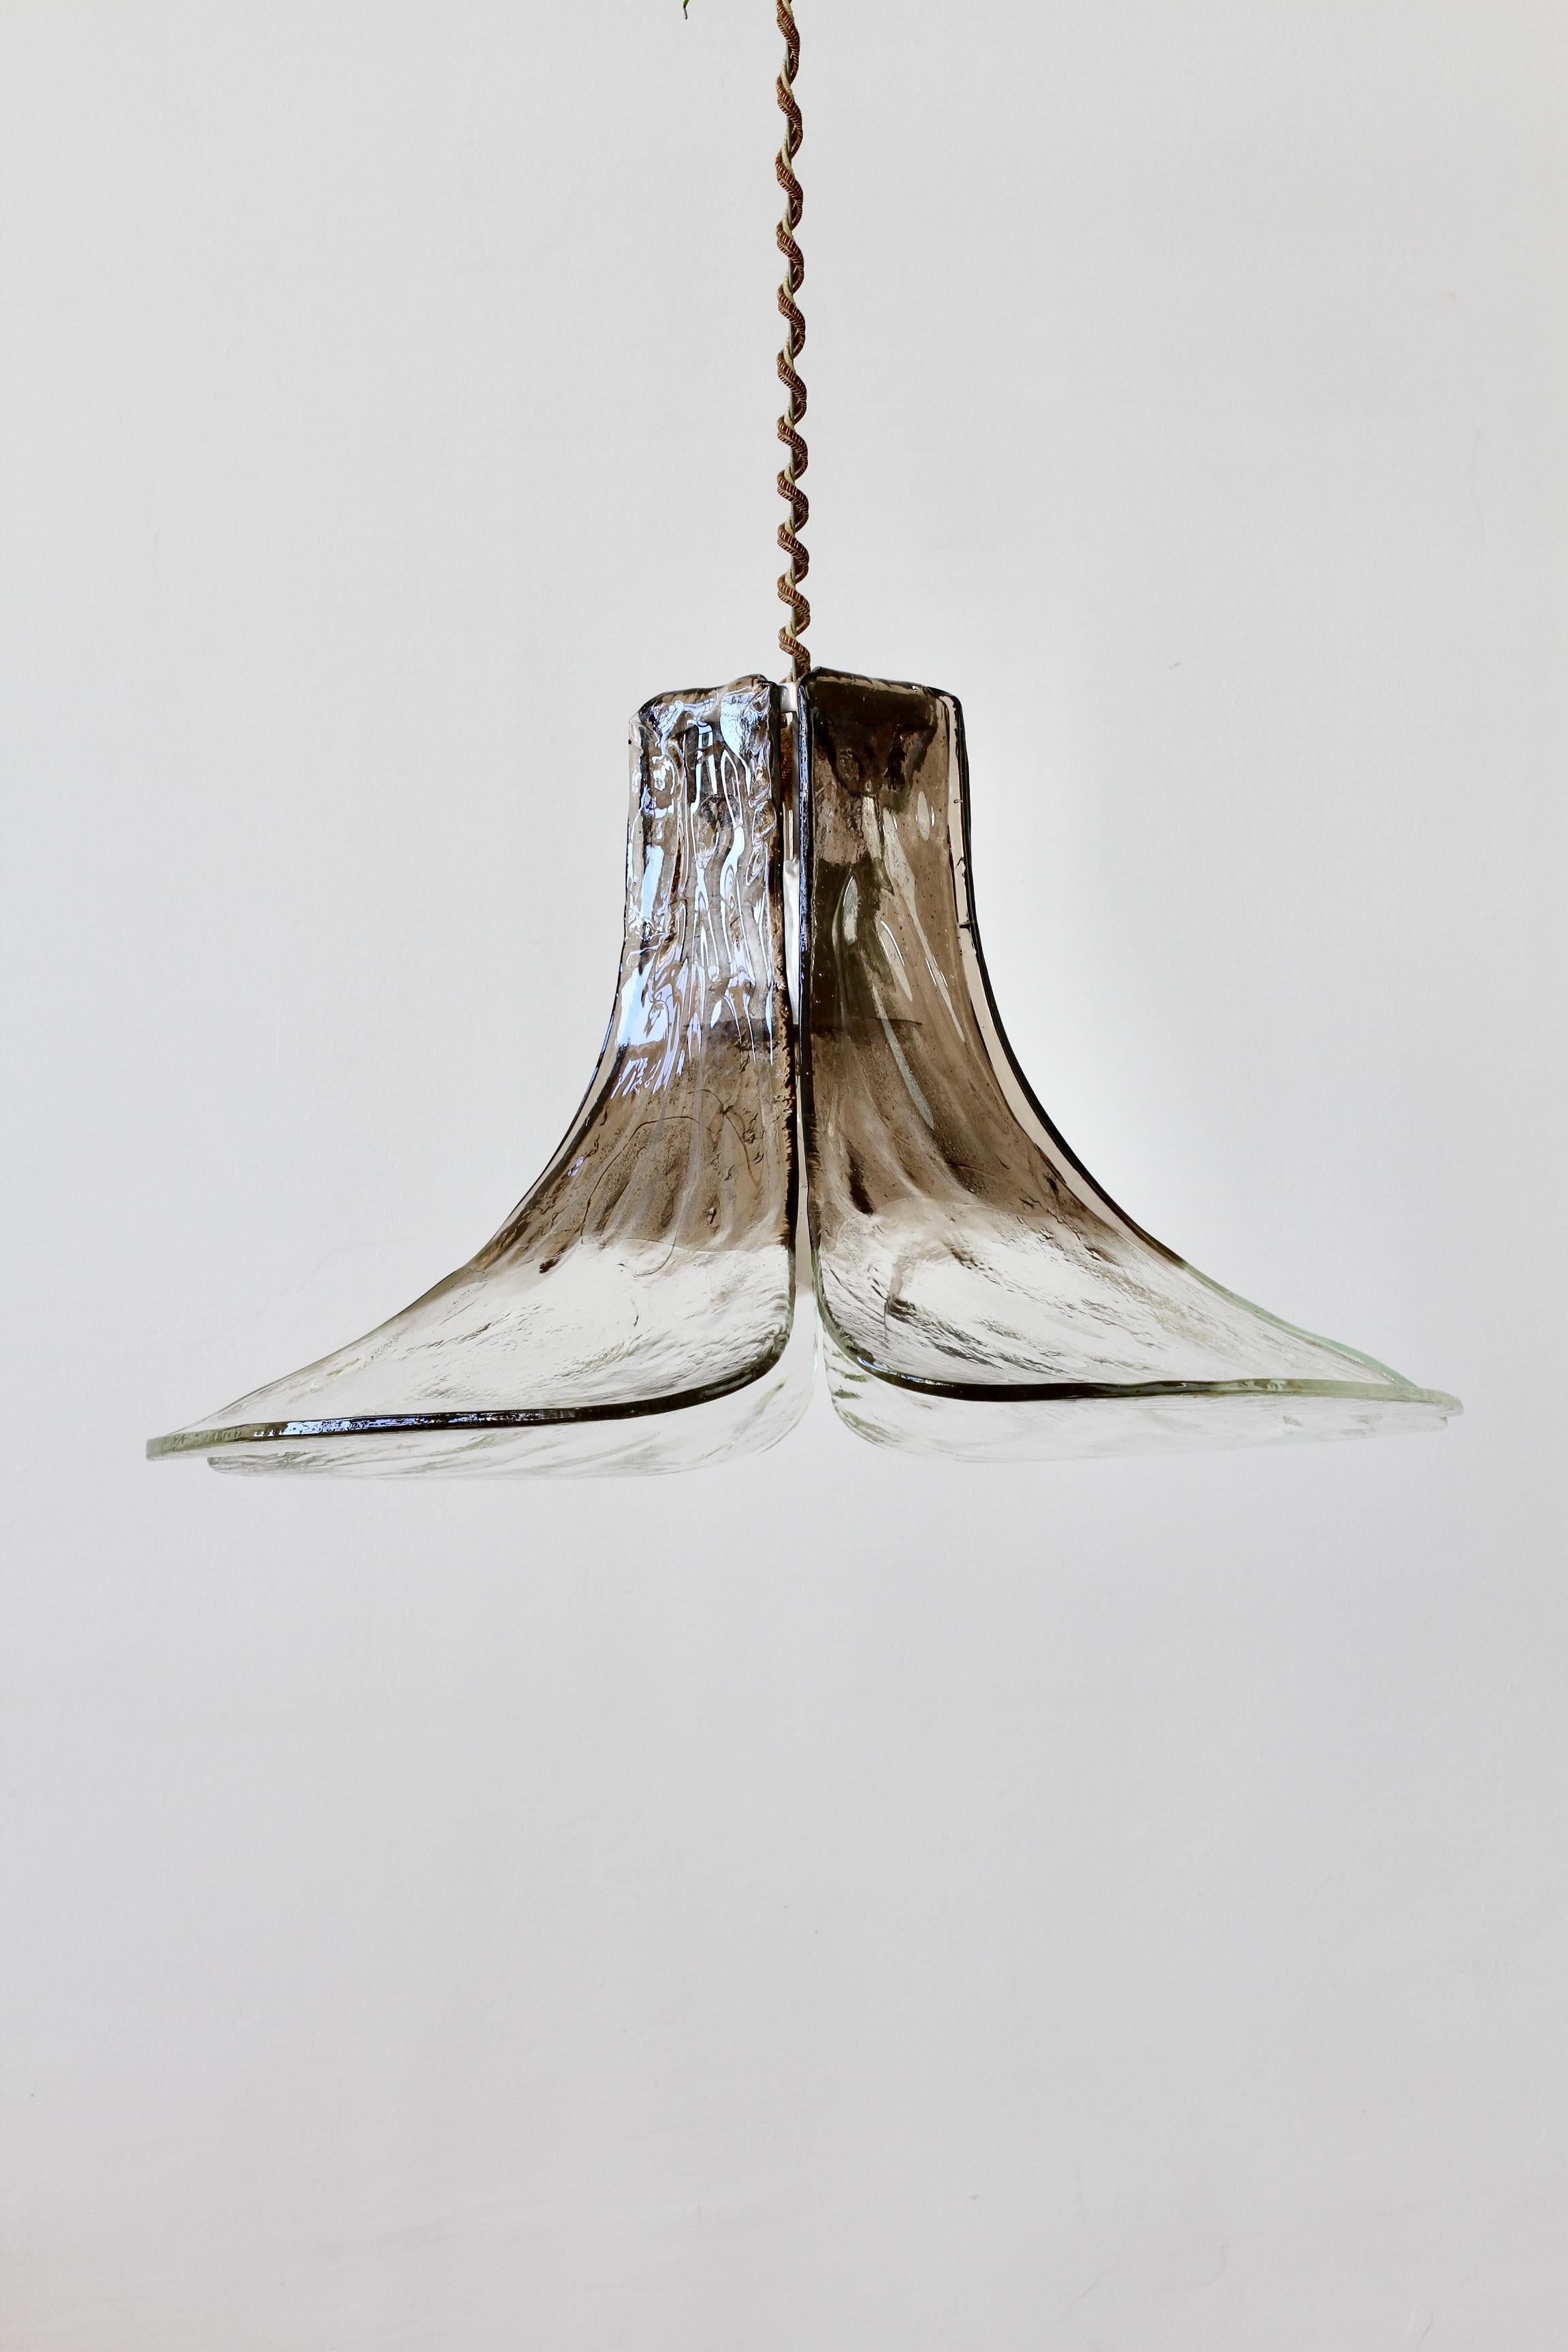 Large (62cm in diameter) vintage midcentury smoked and clear glass hanging pendant lamp or light fixture by Austrian lighting manufacturer Kalmar, circa late 1970s. Featuring three large curved flower petal shaped glass elements, made by Italian